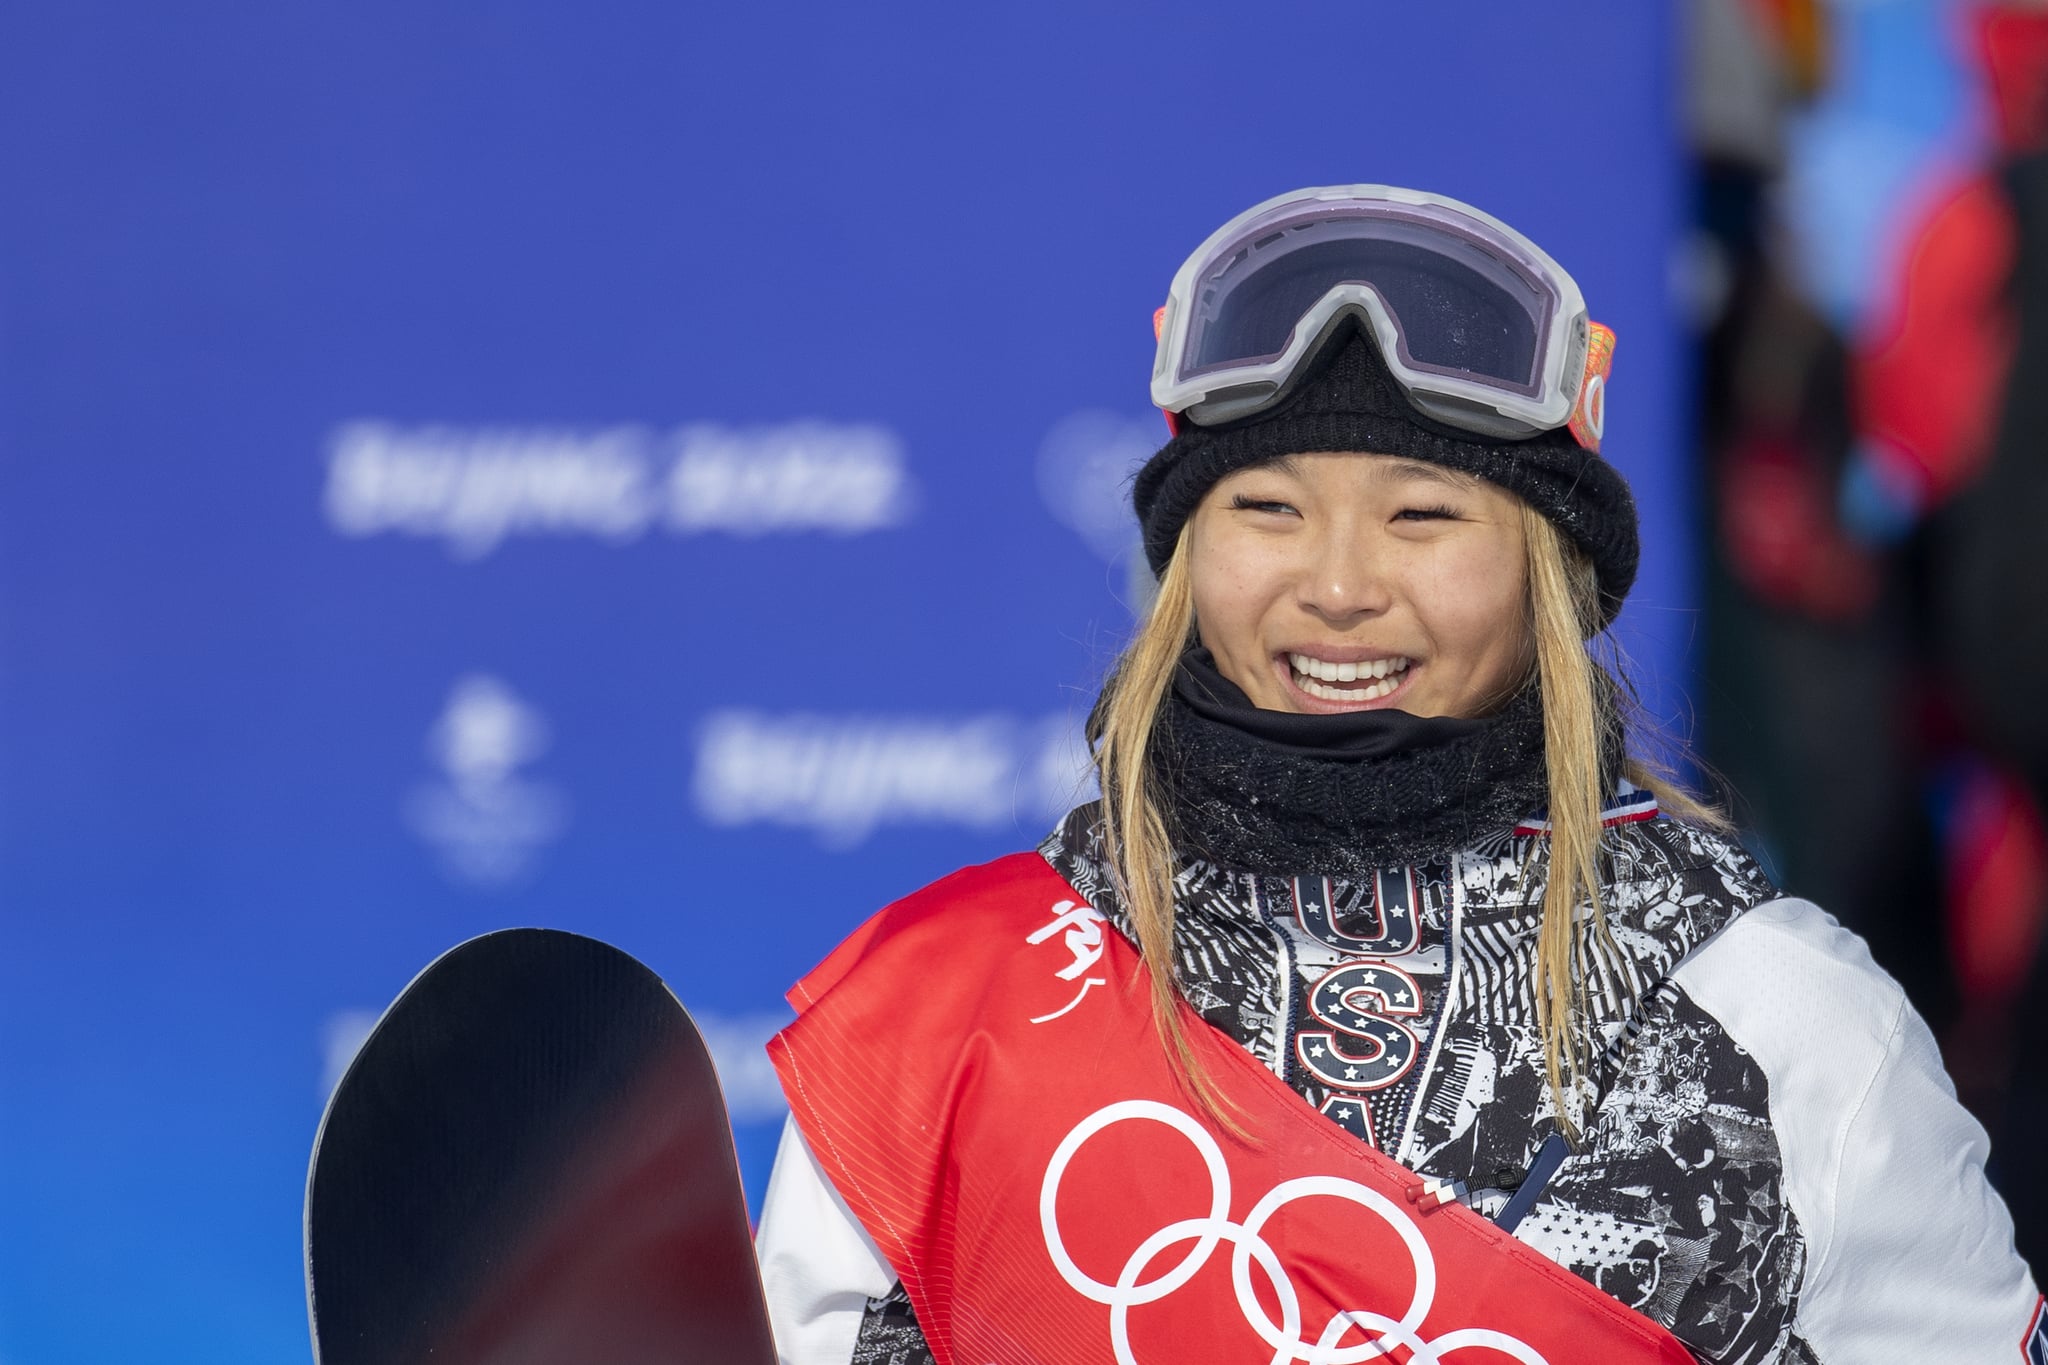 BEIJING, CHINA - February 10: Chloe Kim of the United States after winning the gold medal in the Women's Snowboard Halfpipe Final at Genting Snow Park during the Winter Olympic Games on February 10th, 2022 in Zhangjiakou, China. (Photo by Tim Clayton/Corbis via Getty Images)